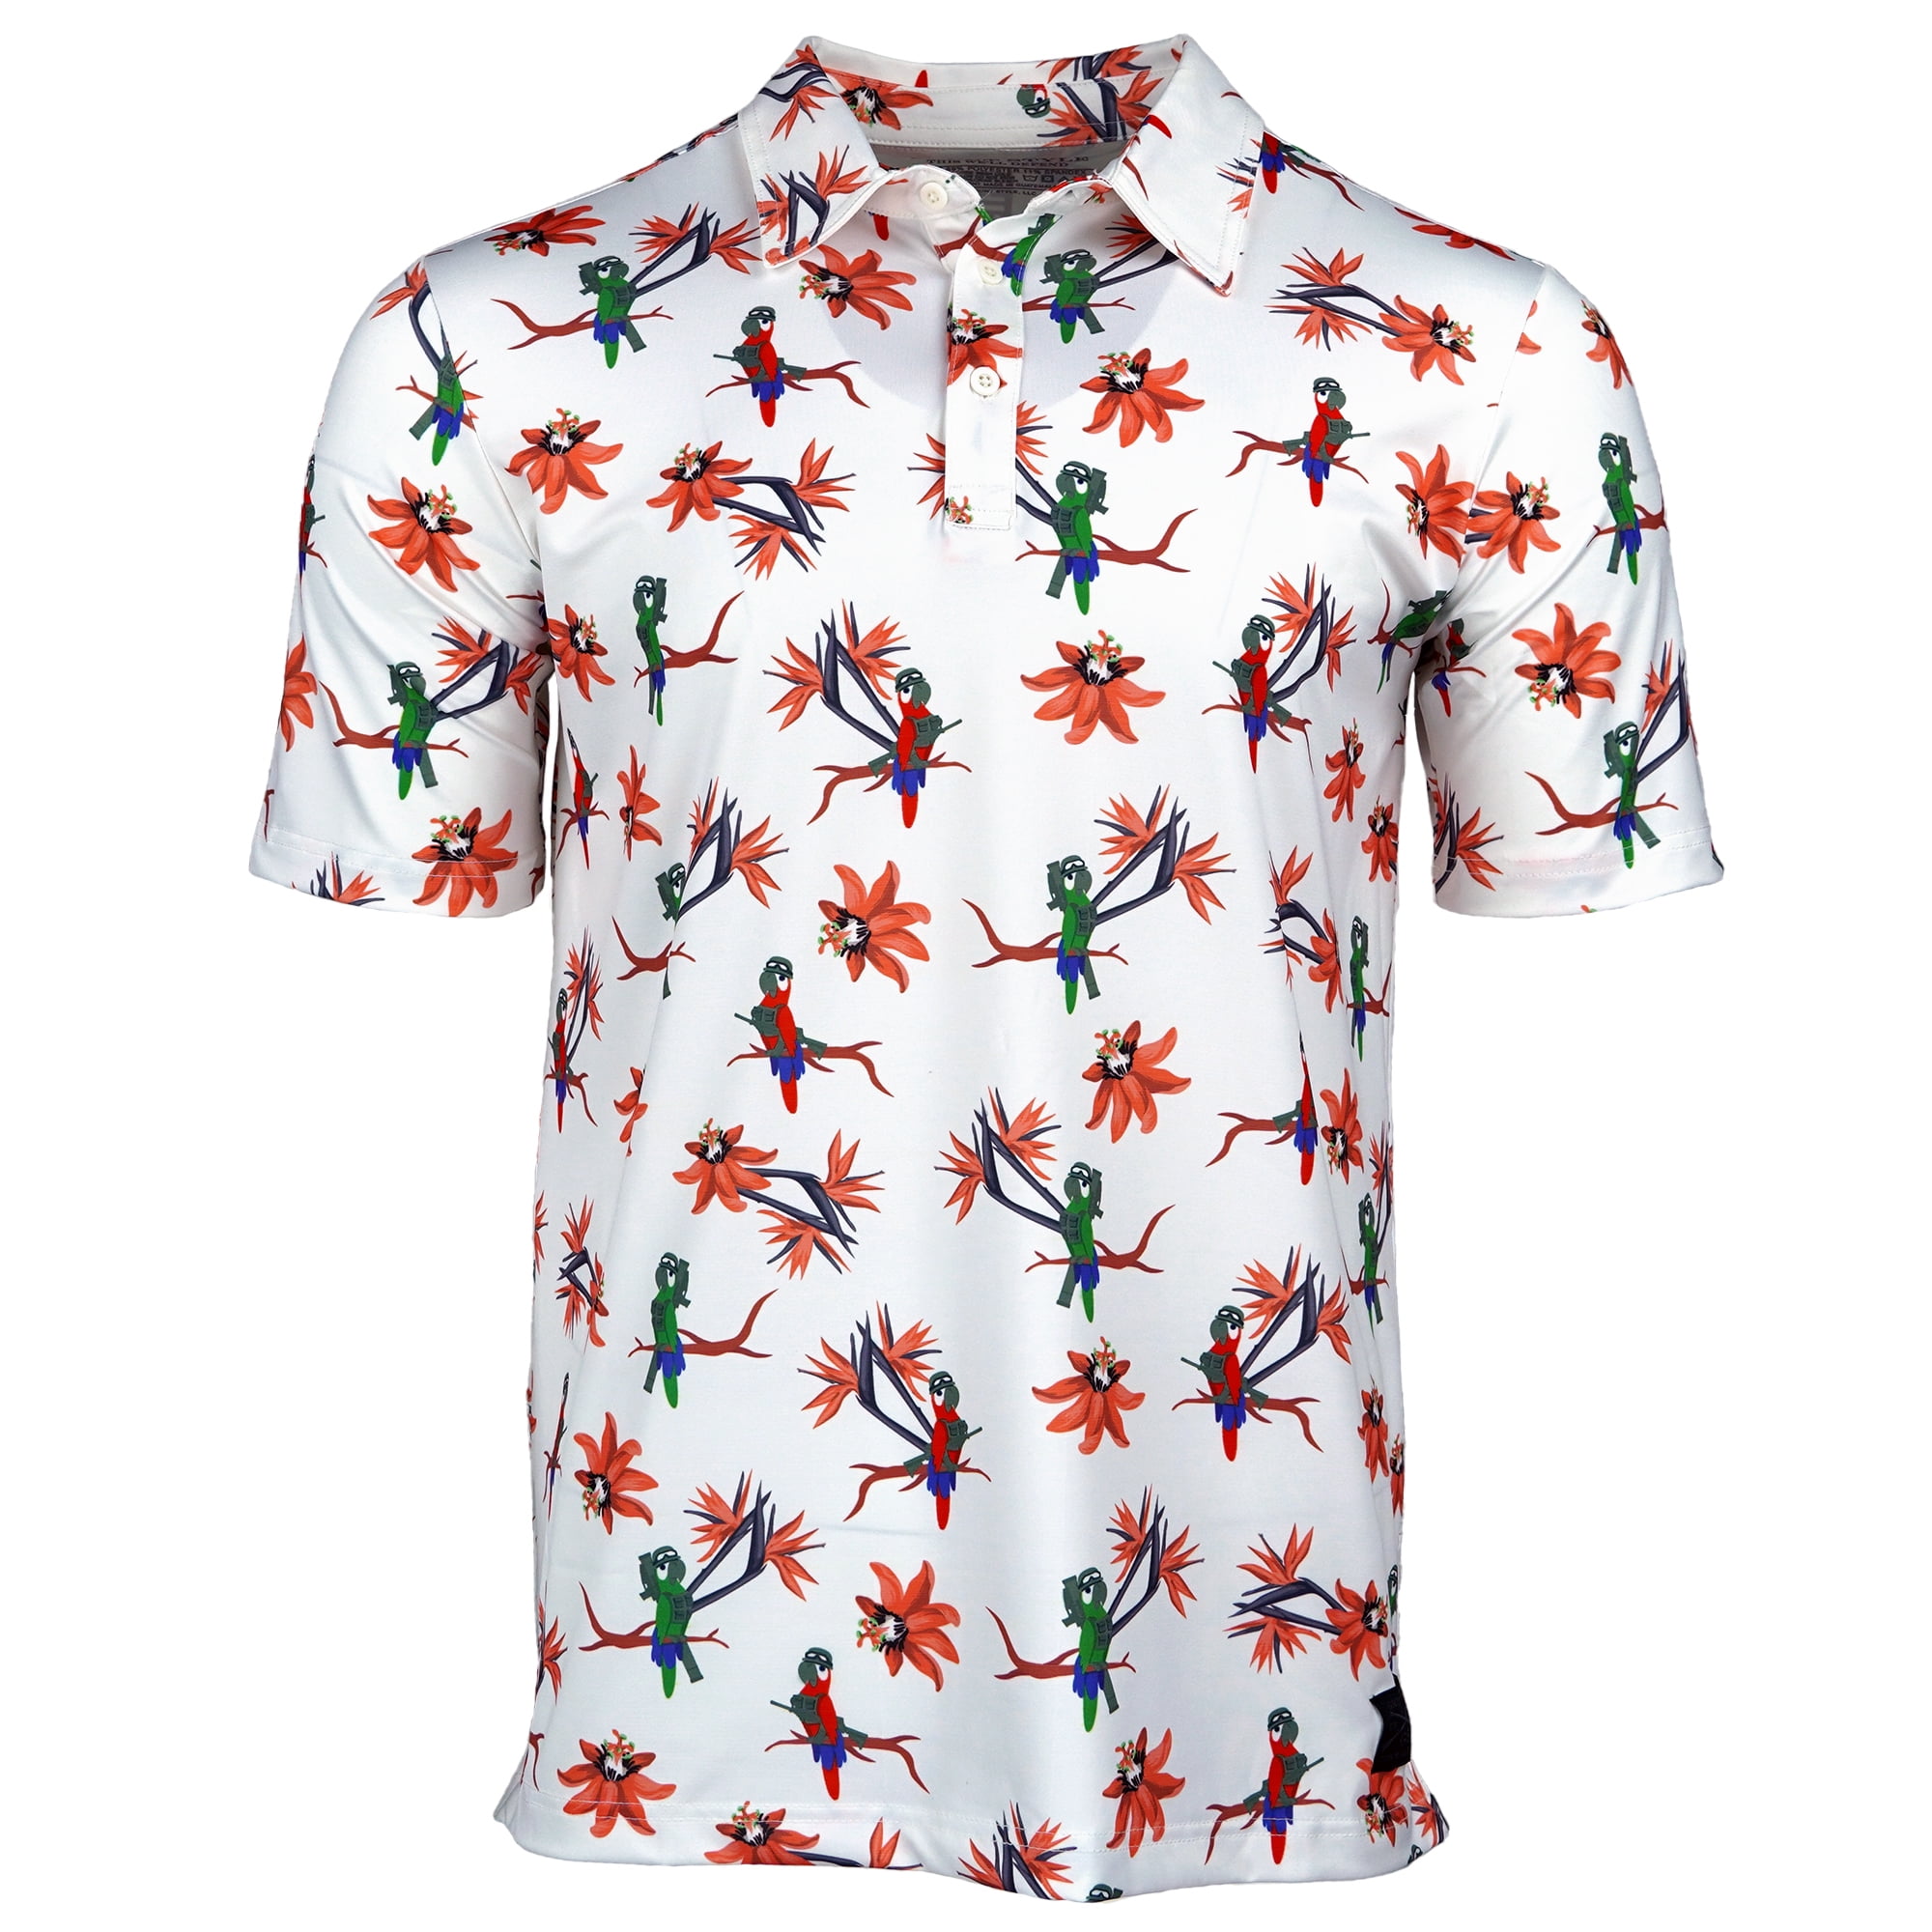 Grunt Style Button Down Polo Shirt - Large - Parrot Trooper - Walmart.com